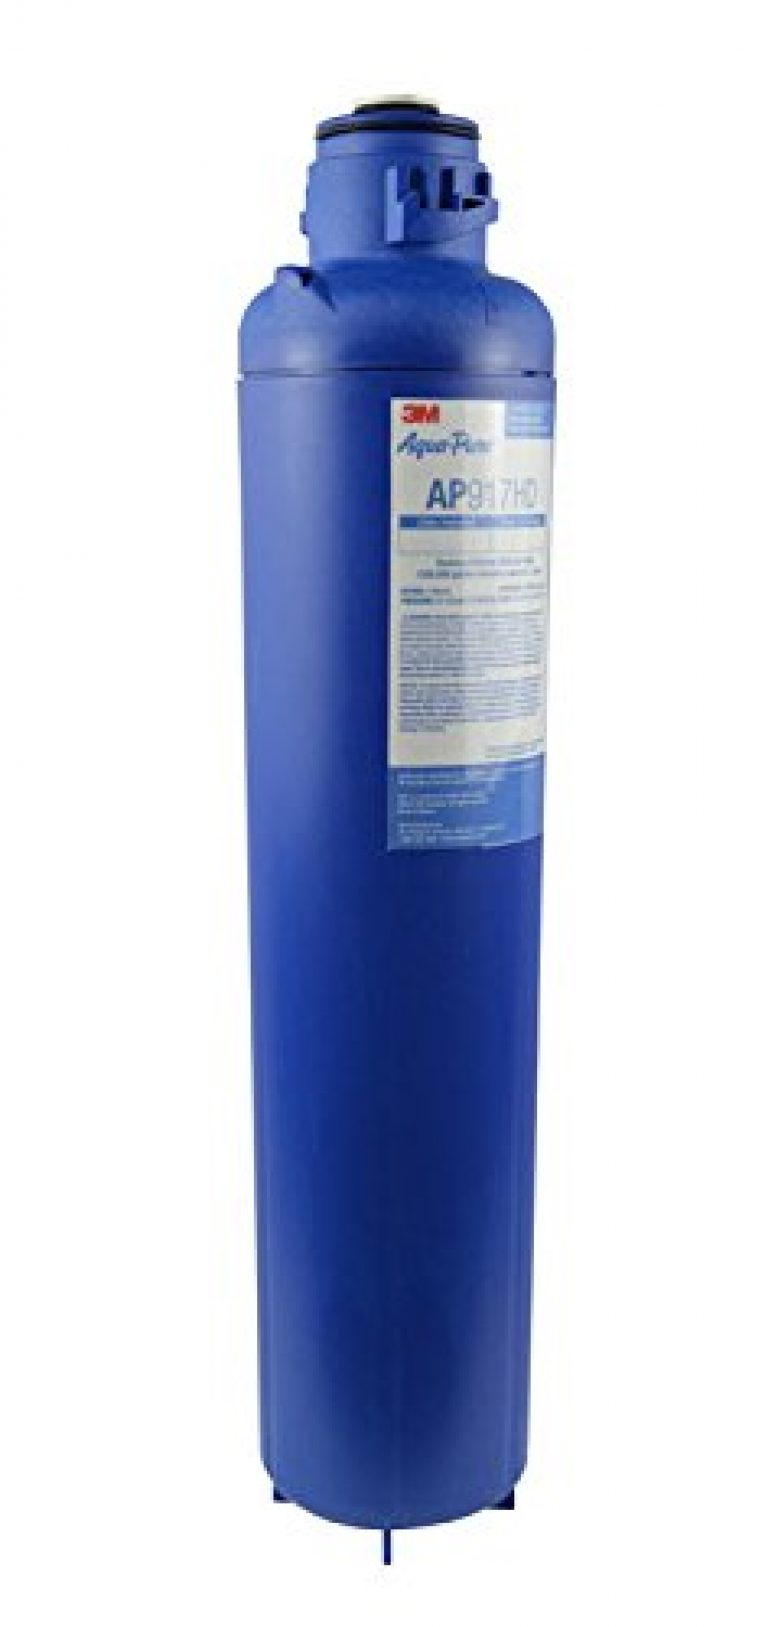 3M Aqua-Pure Whole House Water Filtration System Review